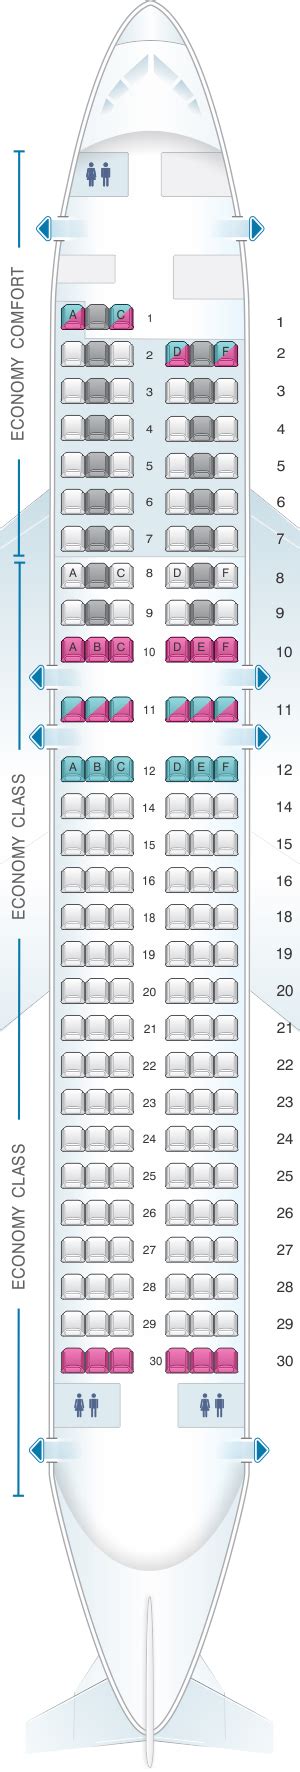 Allegiant Aircraft Seating Chart